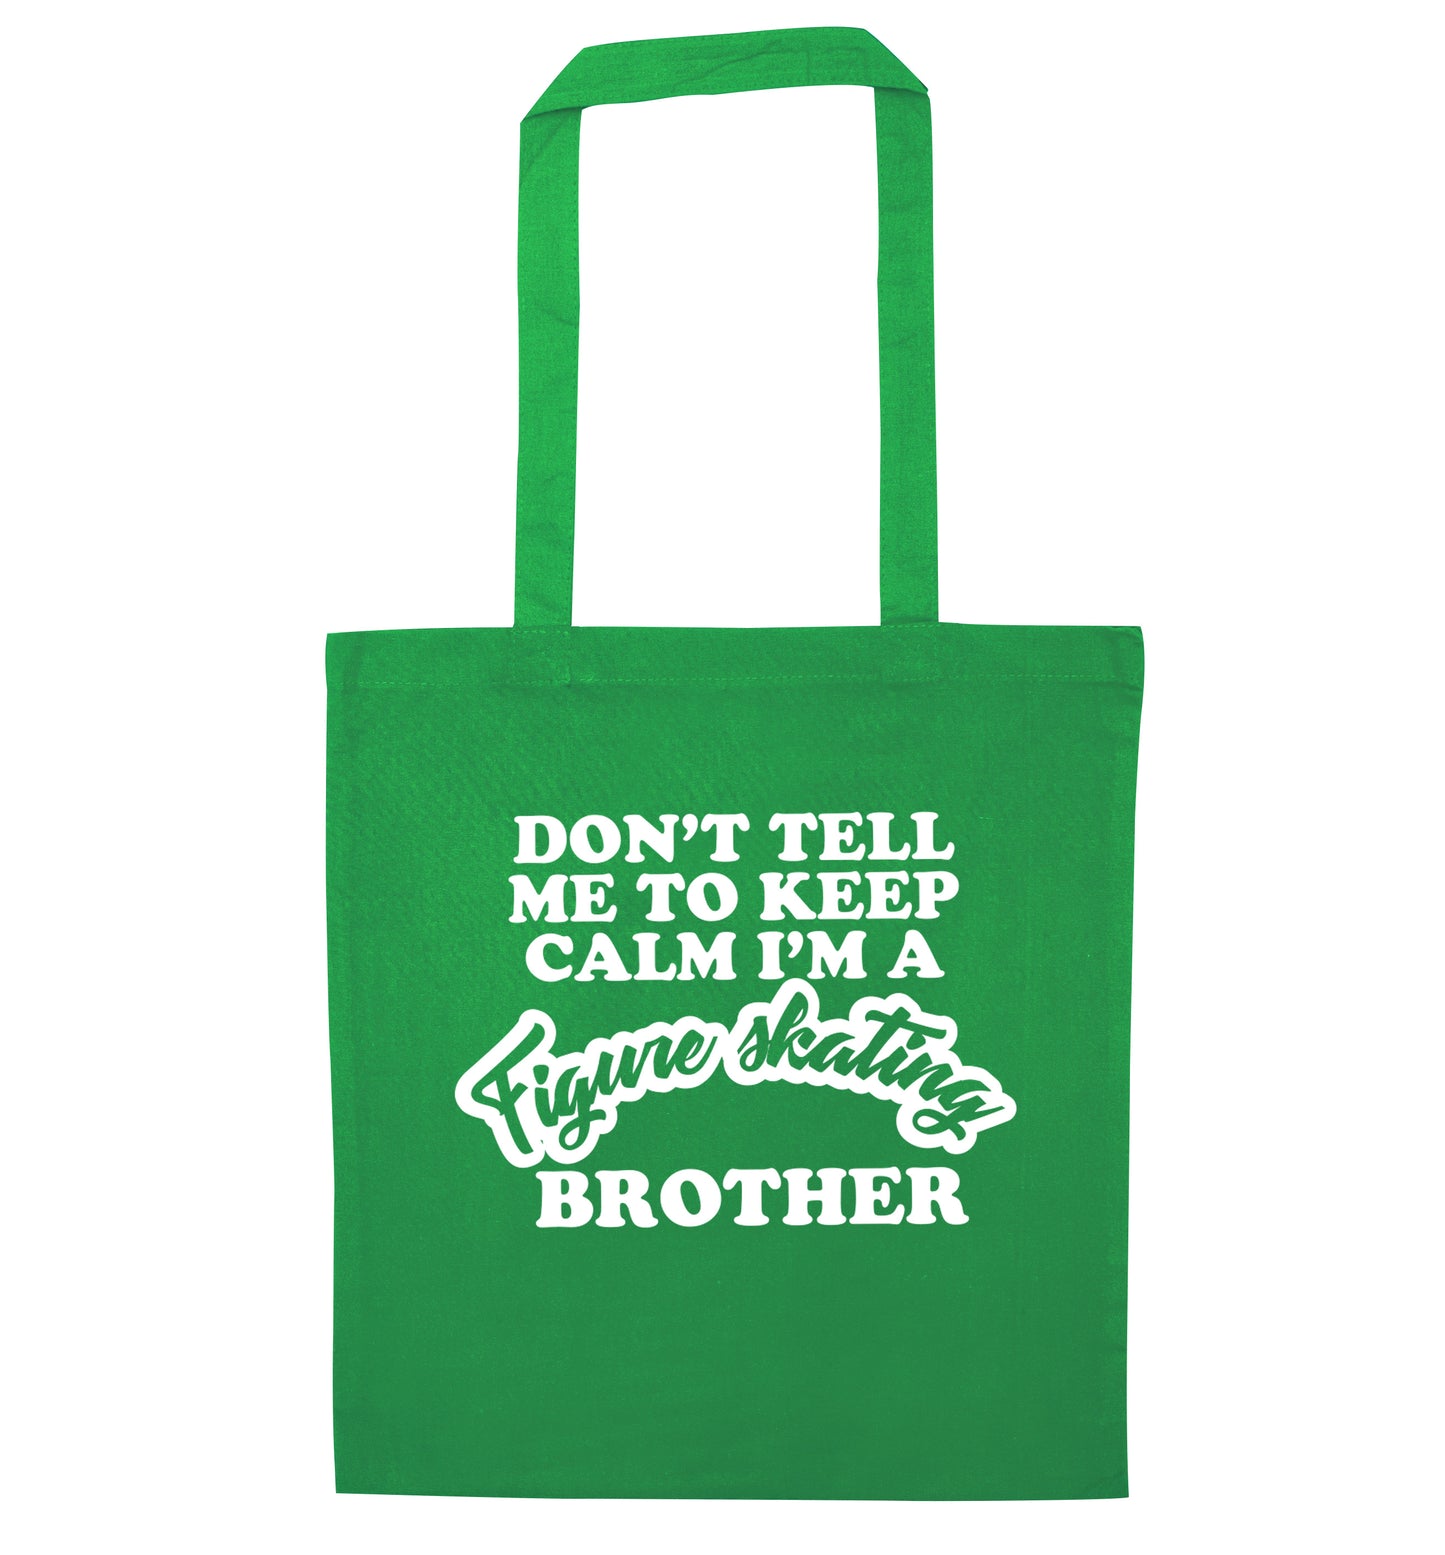 Don't tell me to keep calm I'm a figure skating brother green tote bag